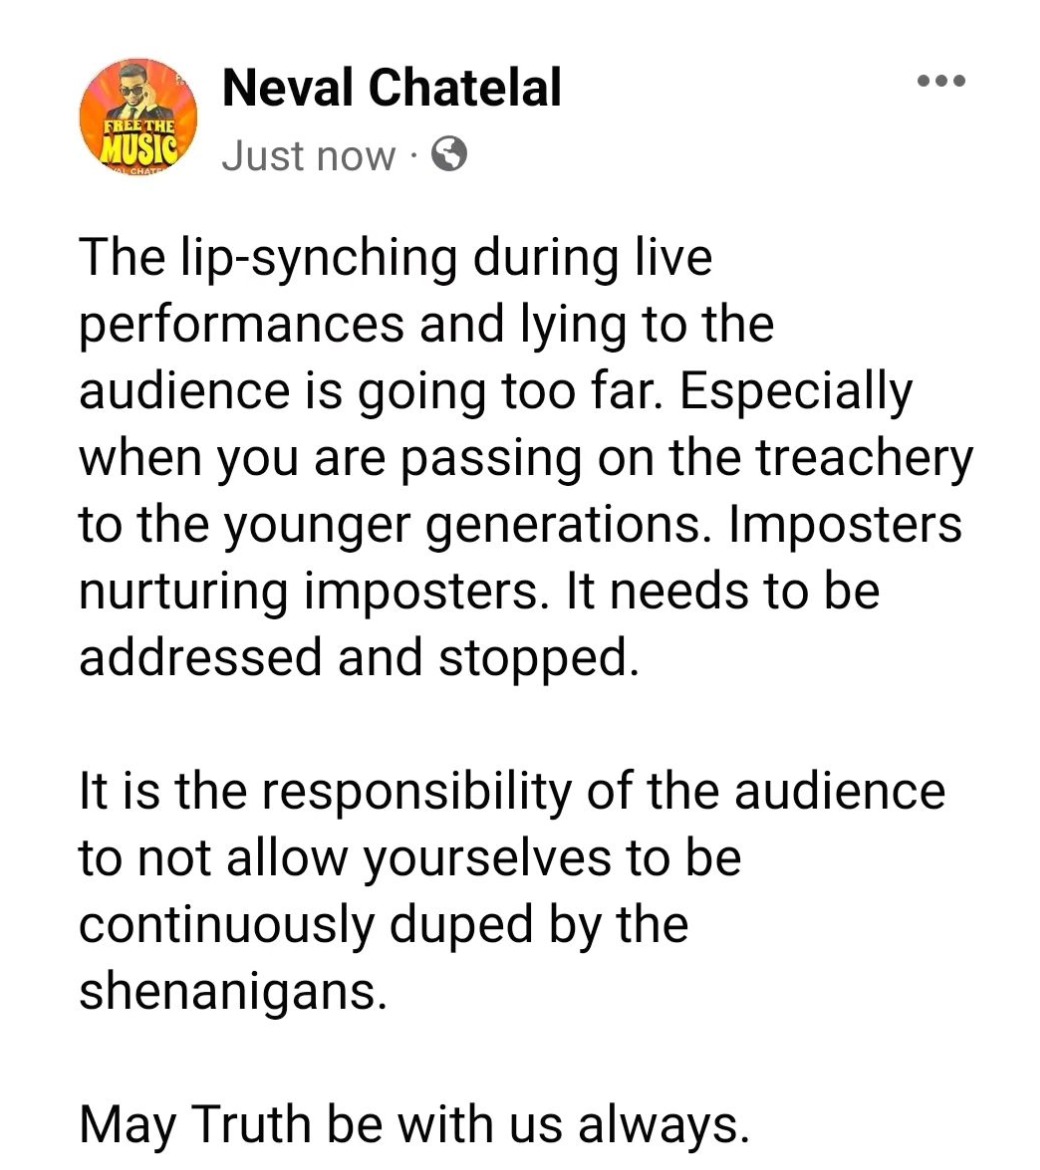 Neval Chatelal Laments the declining quality of Live Singing Performances